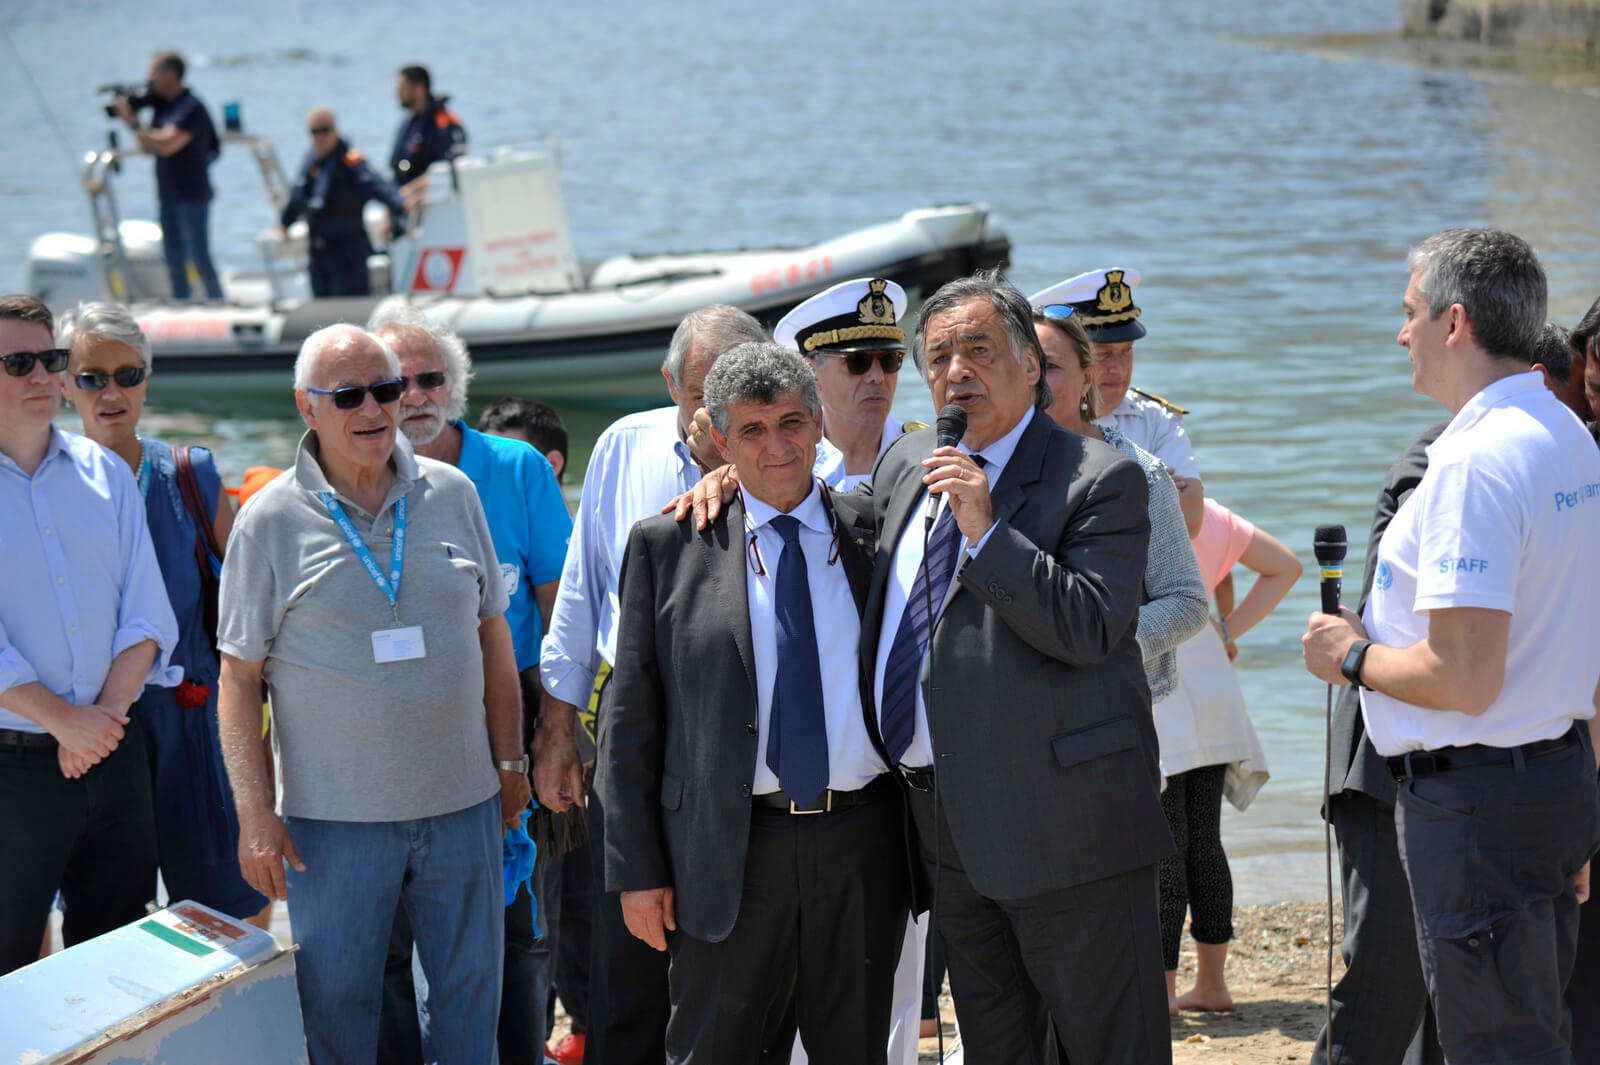 Palermo Mayor Leoluca Orlando addresses tje Italian Coastguard, children, volunteers and officials taking part in a symbolic rescue of paper boats to send a message to the G7 leaders to take action to safeguard refugees in Palermo, Italy, May 25, 2017. Salvatore Cavalli | AP